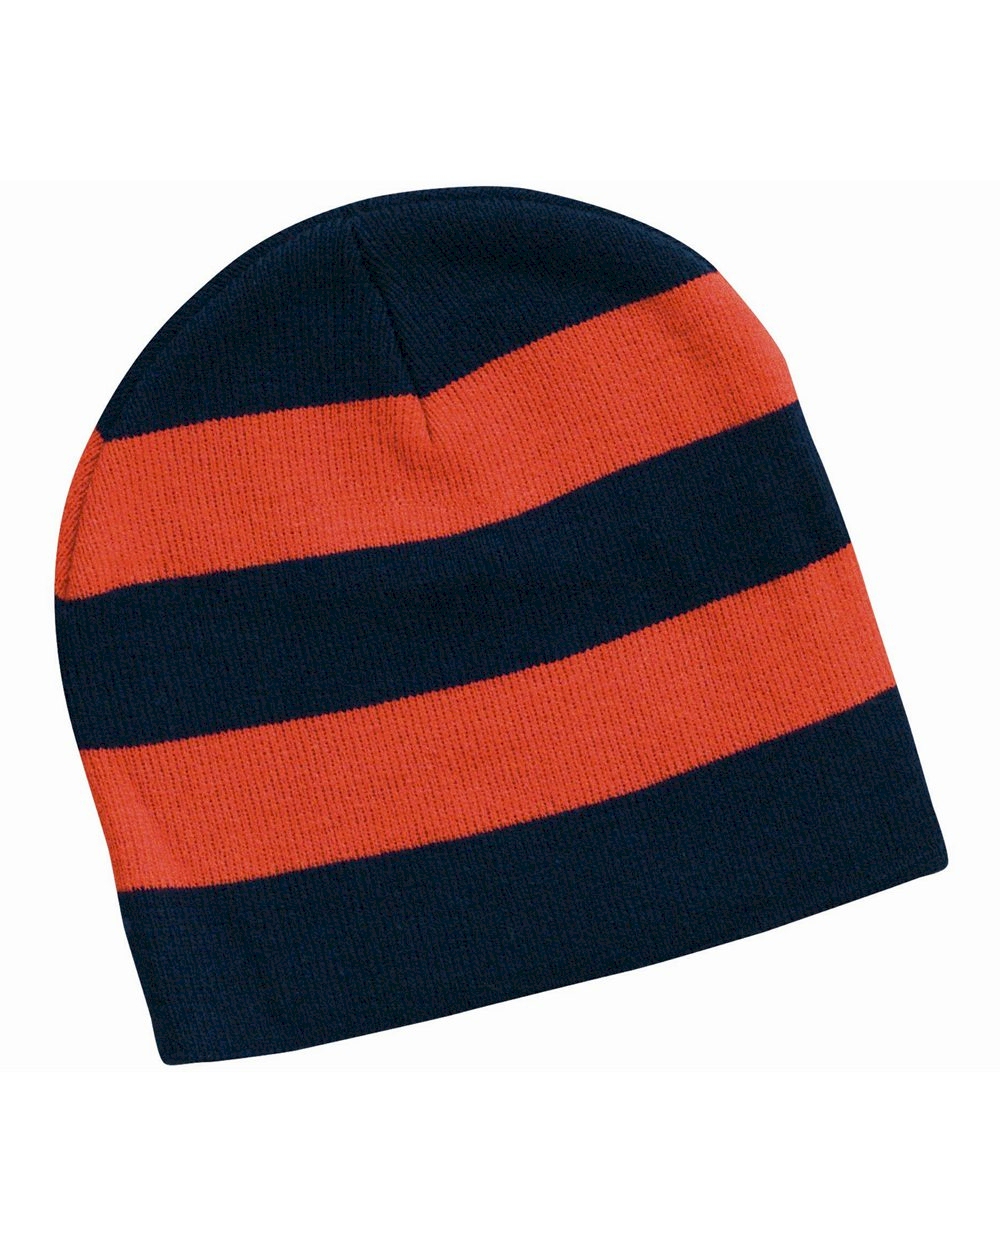 Rugby Striped Knit Beanie Embroidery Blanks - Navy/Orange